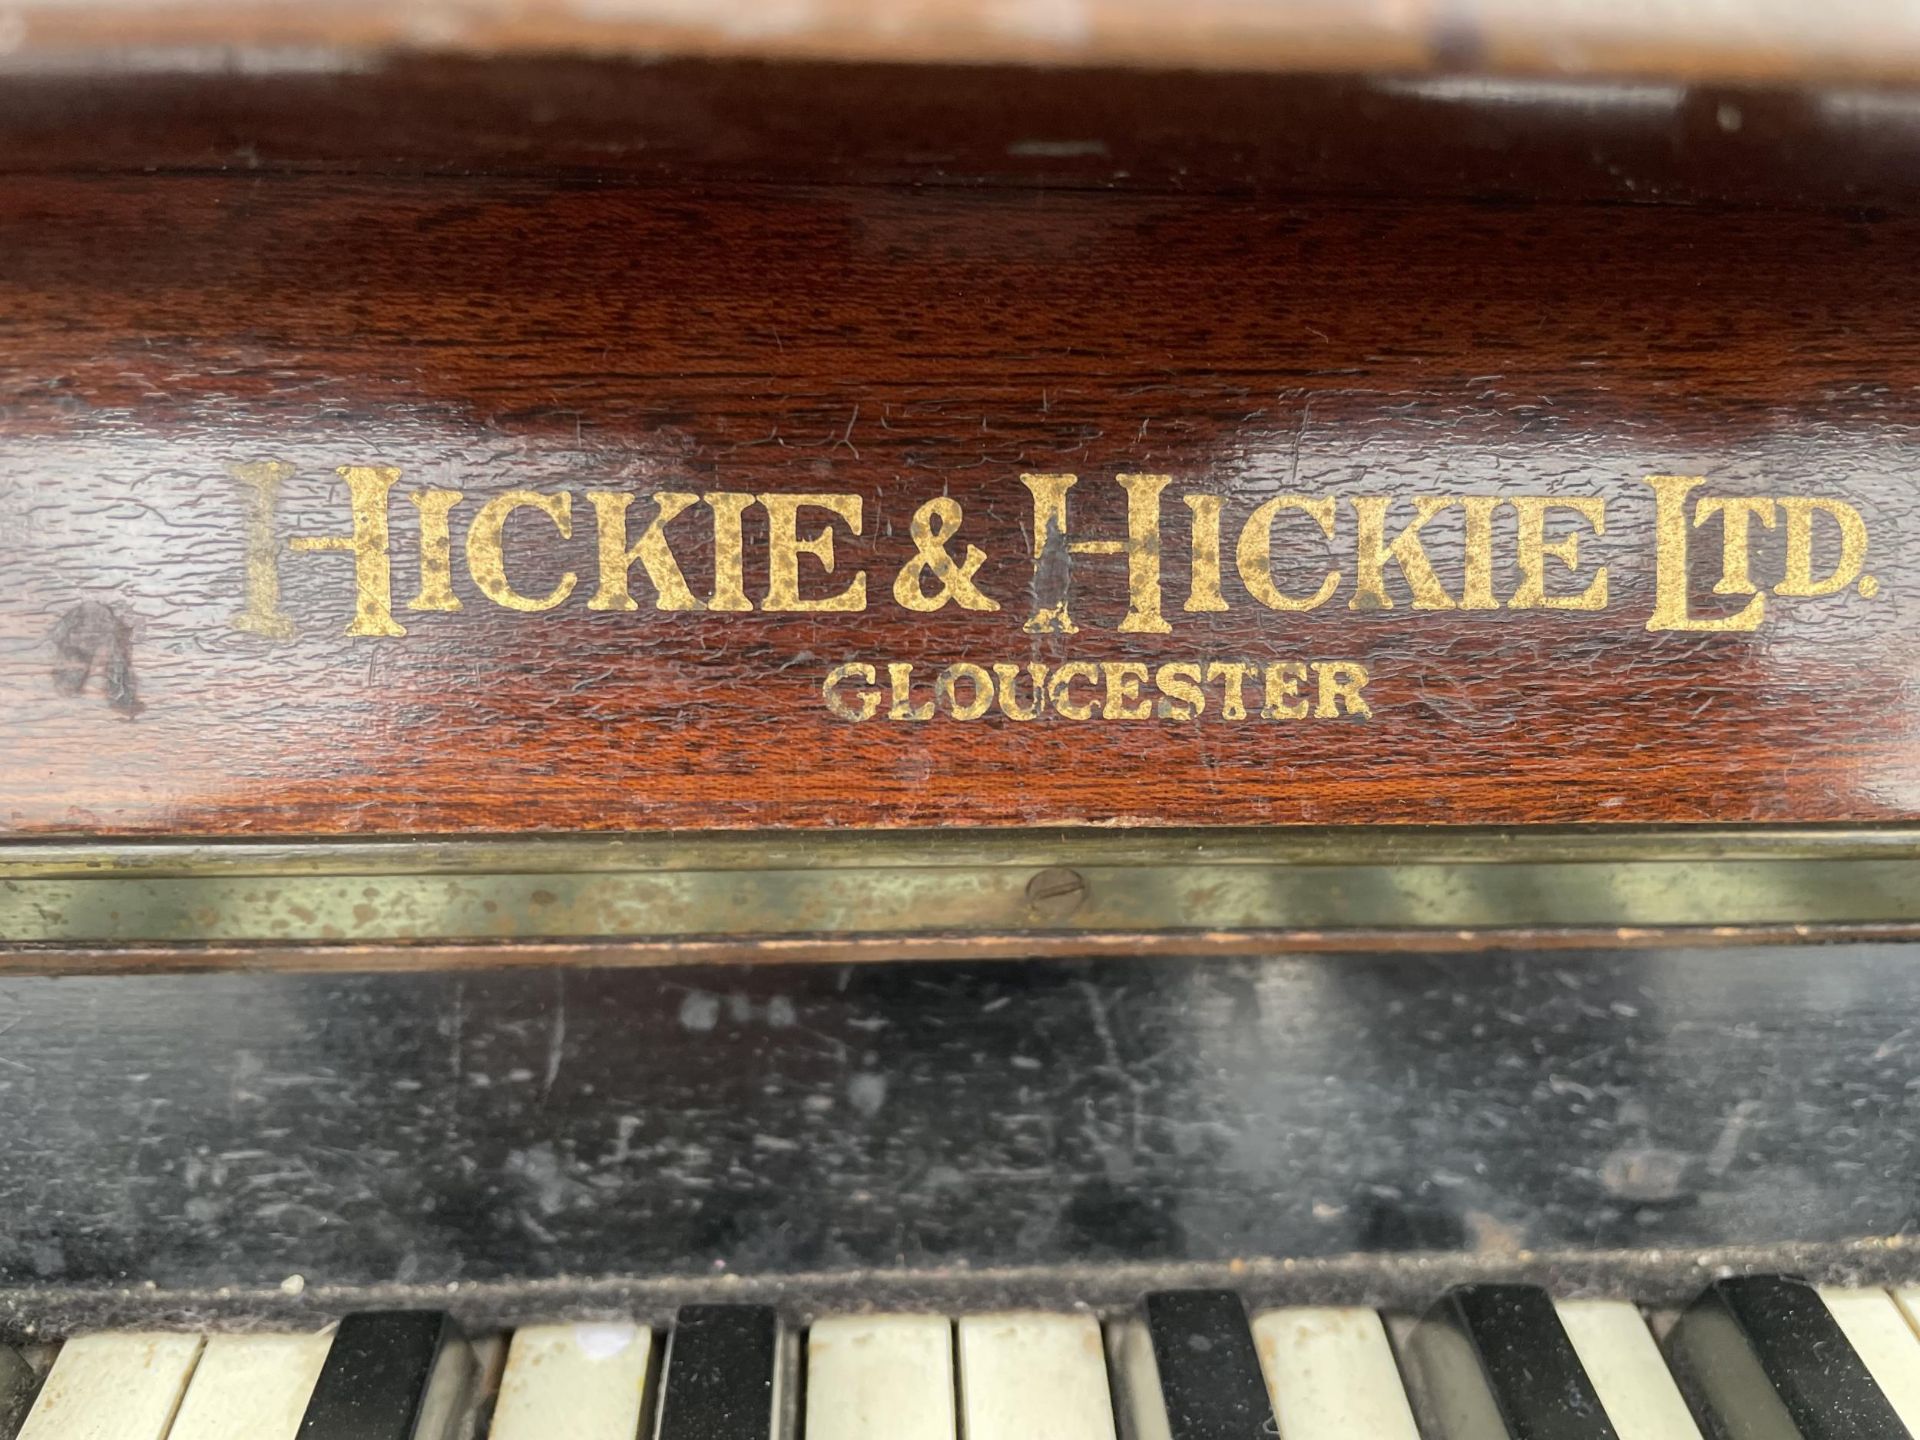 AN OVERSTRUNG PIANO (HICKIE & HICKIE LTD, GLOVES) - Image 3 of 4